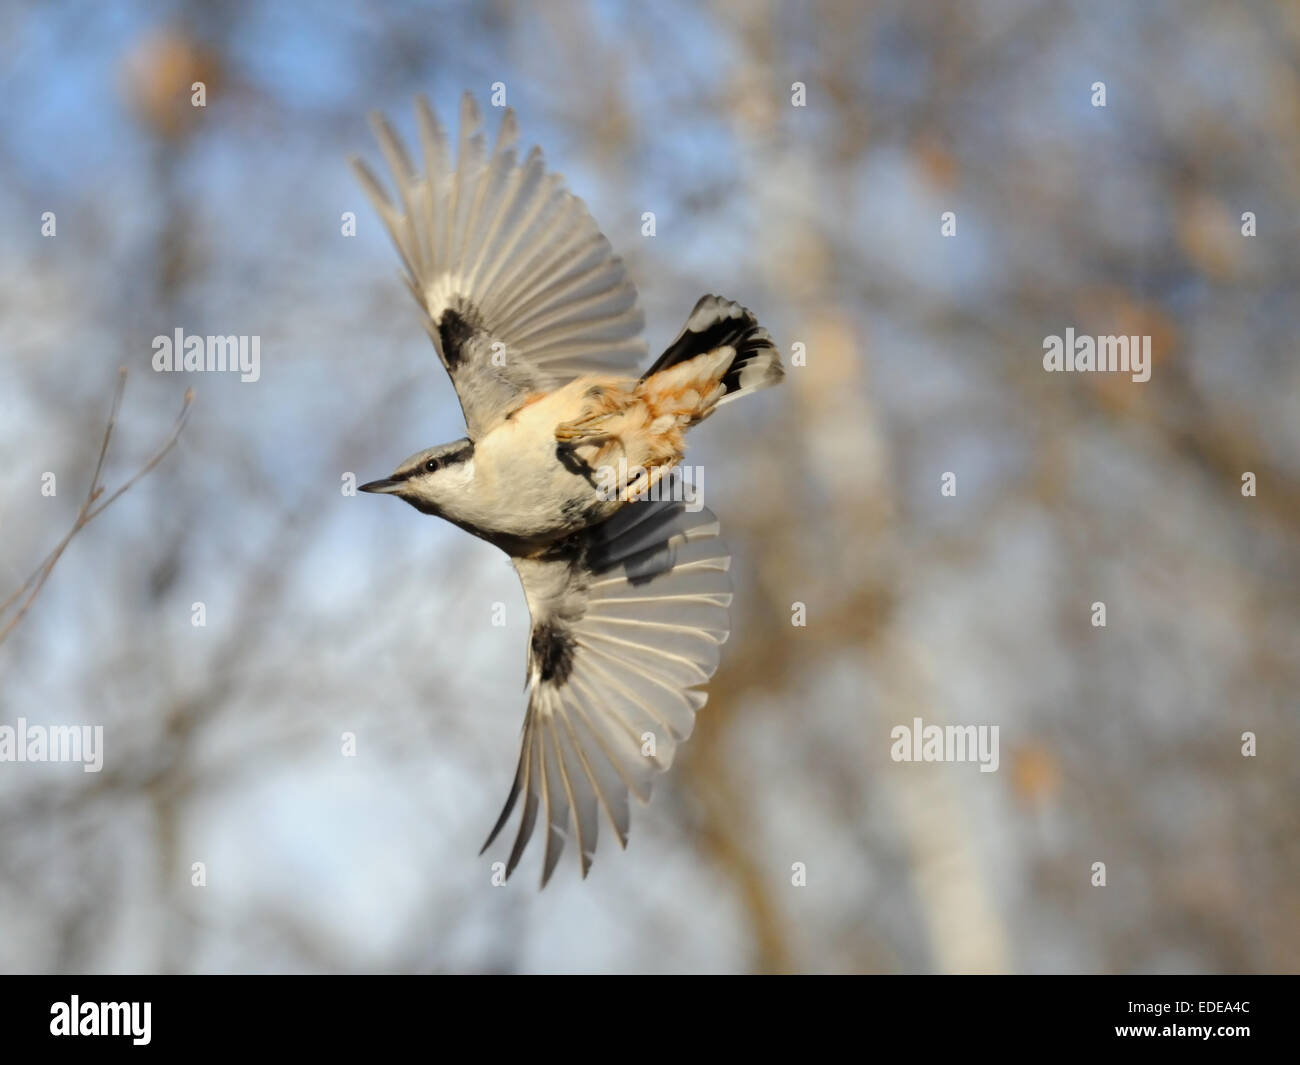 Flying Nuthatch with open wings against blue and white autumn background. Stock Photo